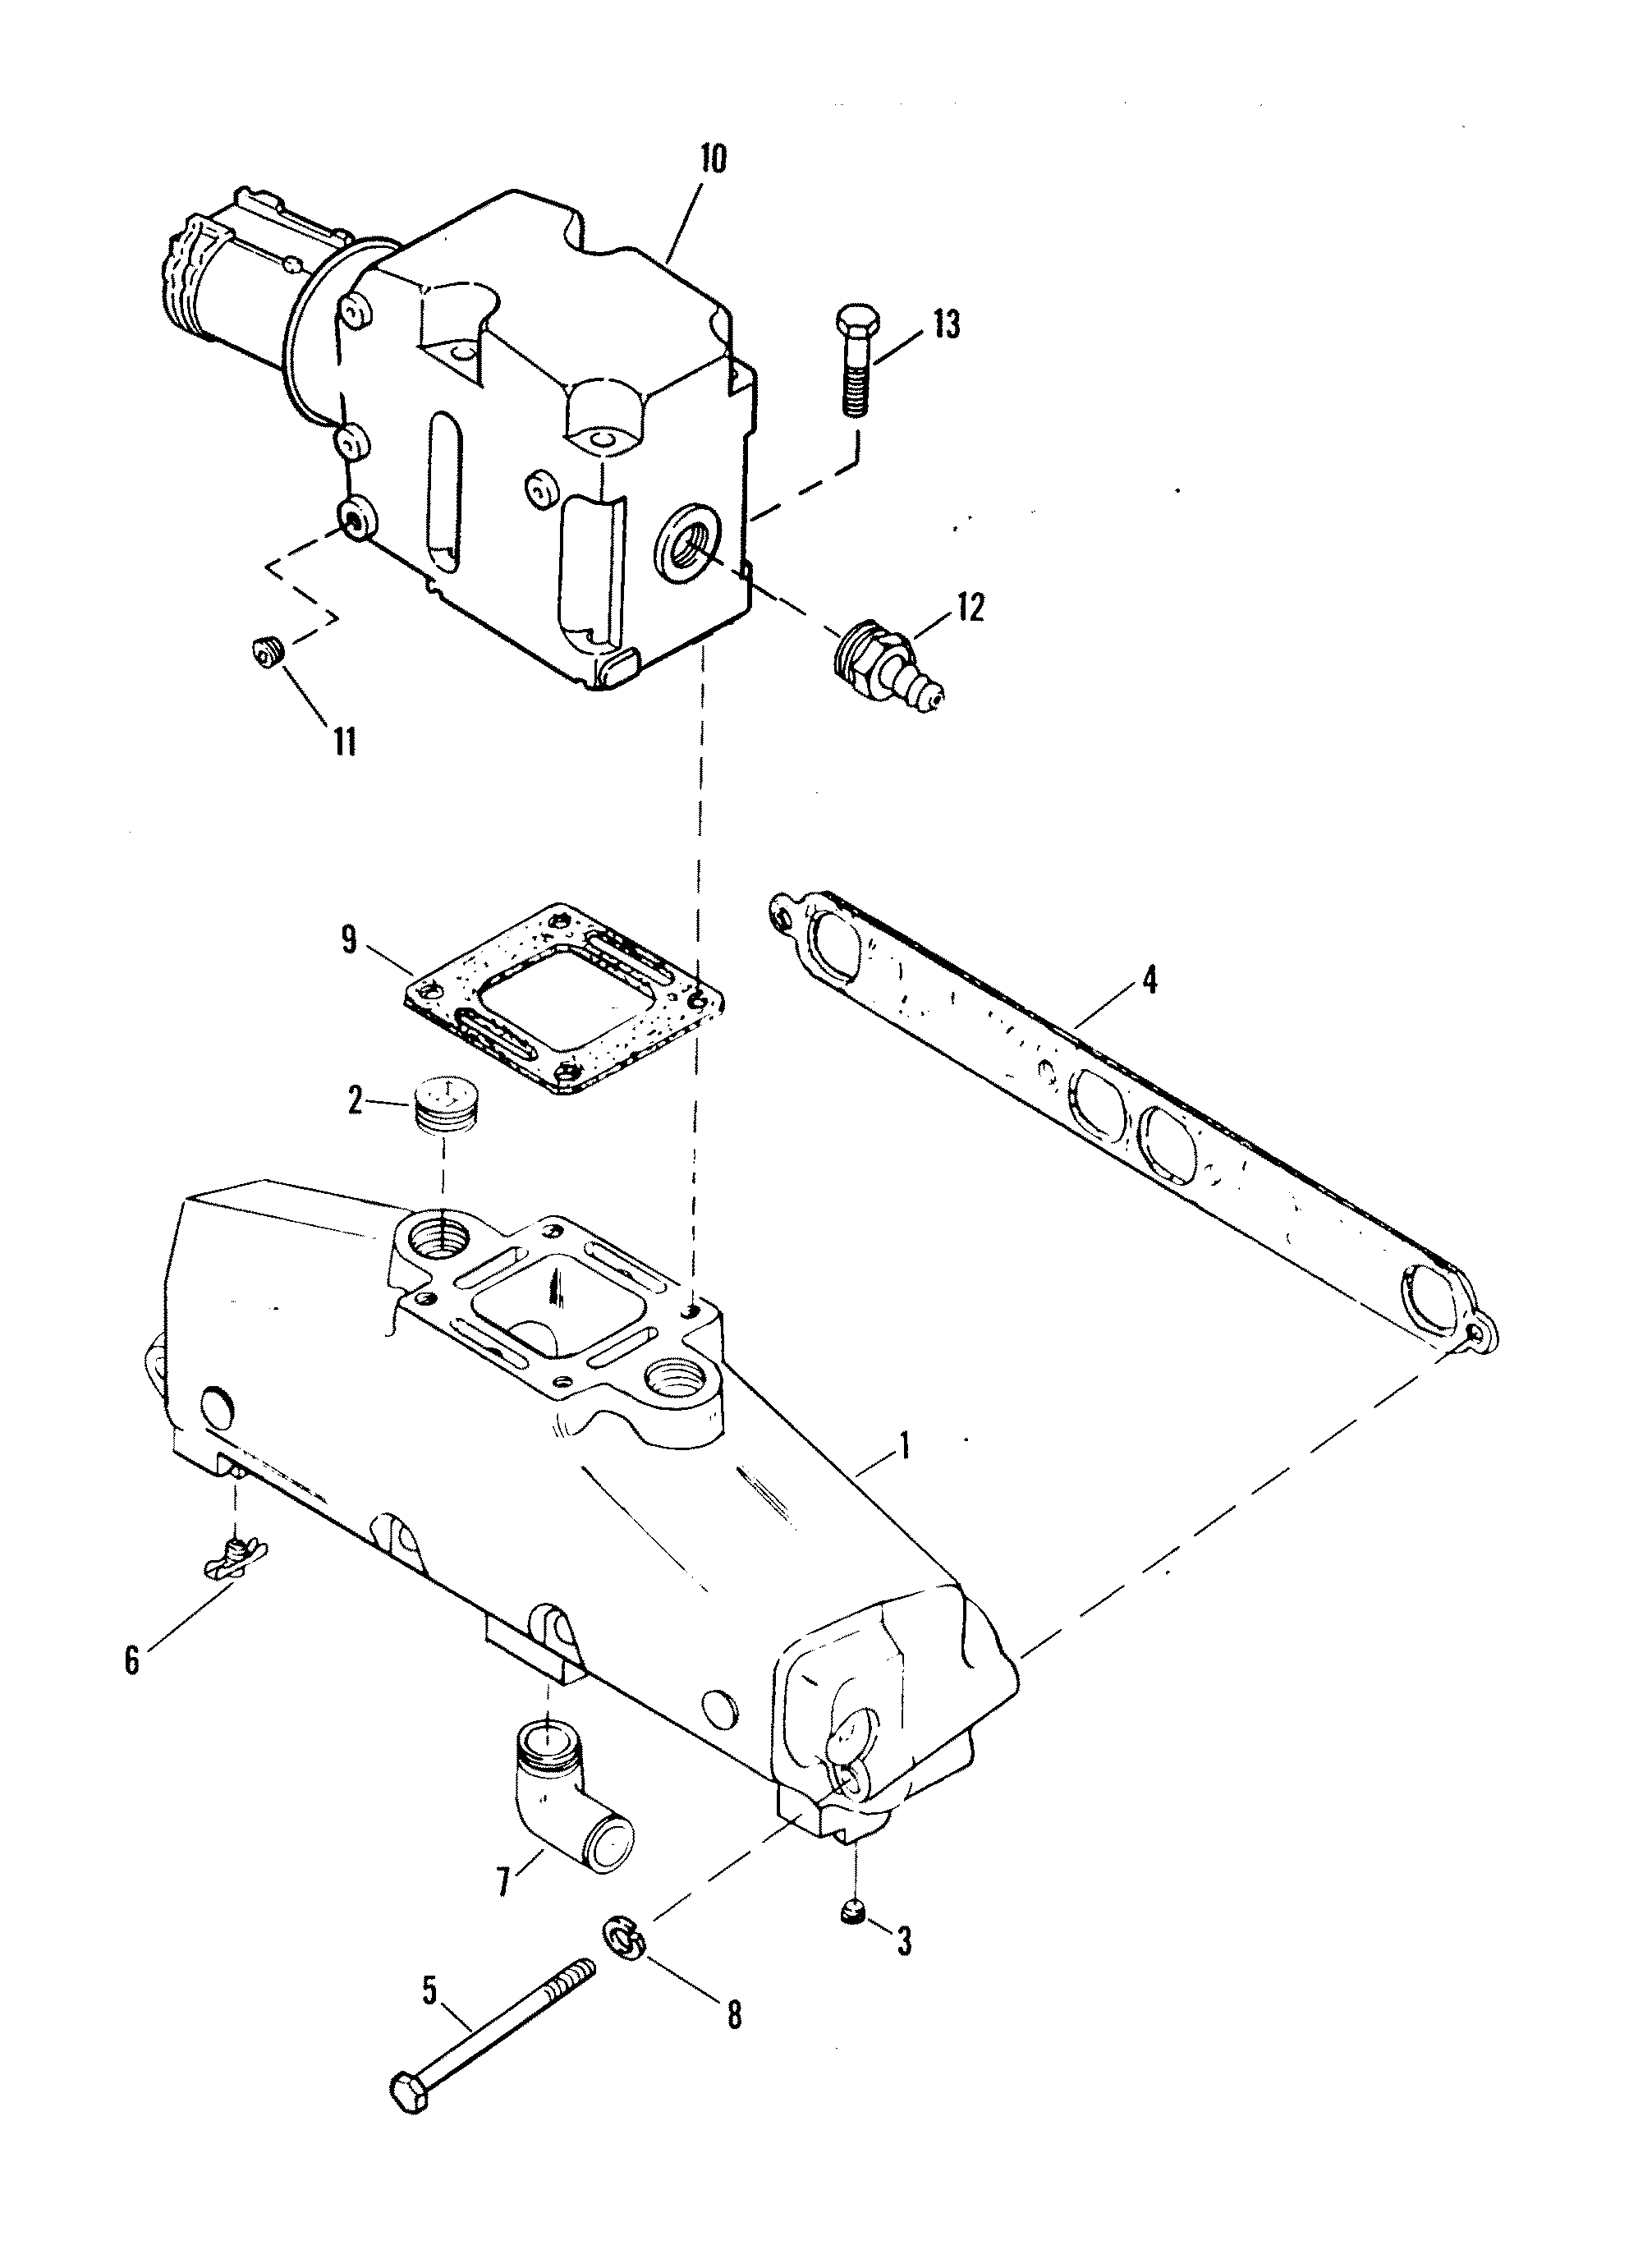 EXHAUST MANIFOLD AND EXHAUST ELBOW(CAST IRON)